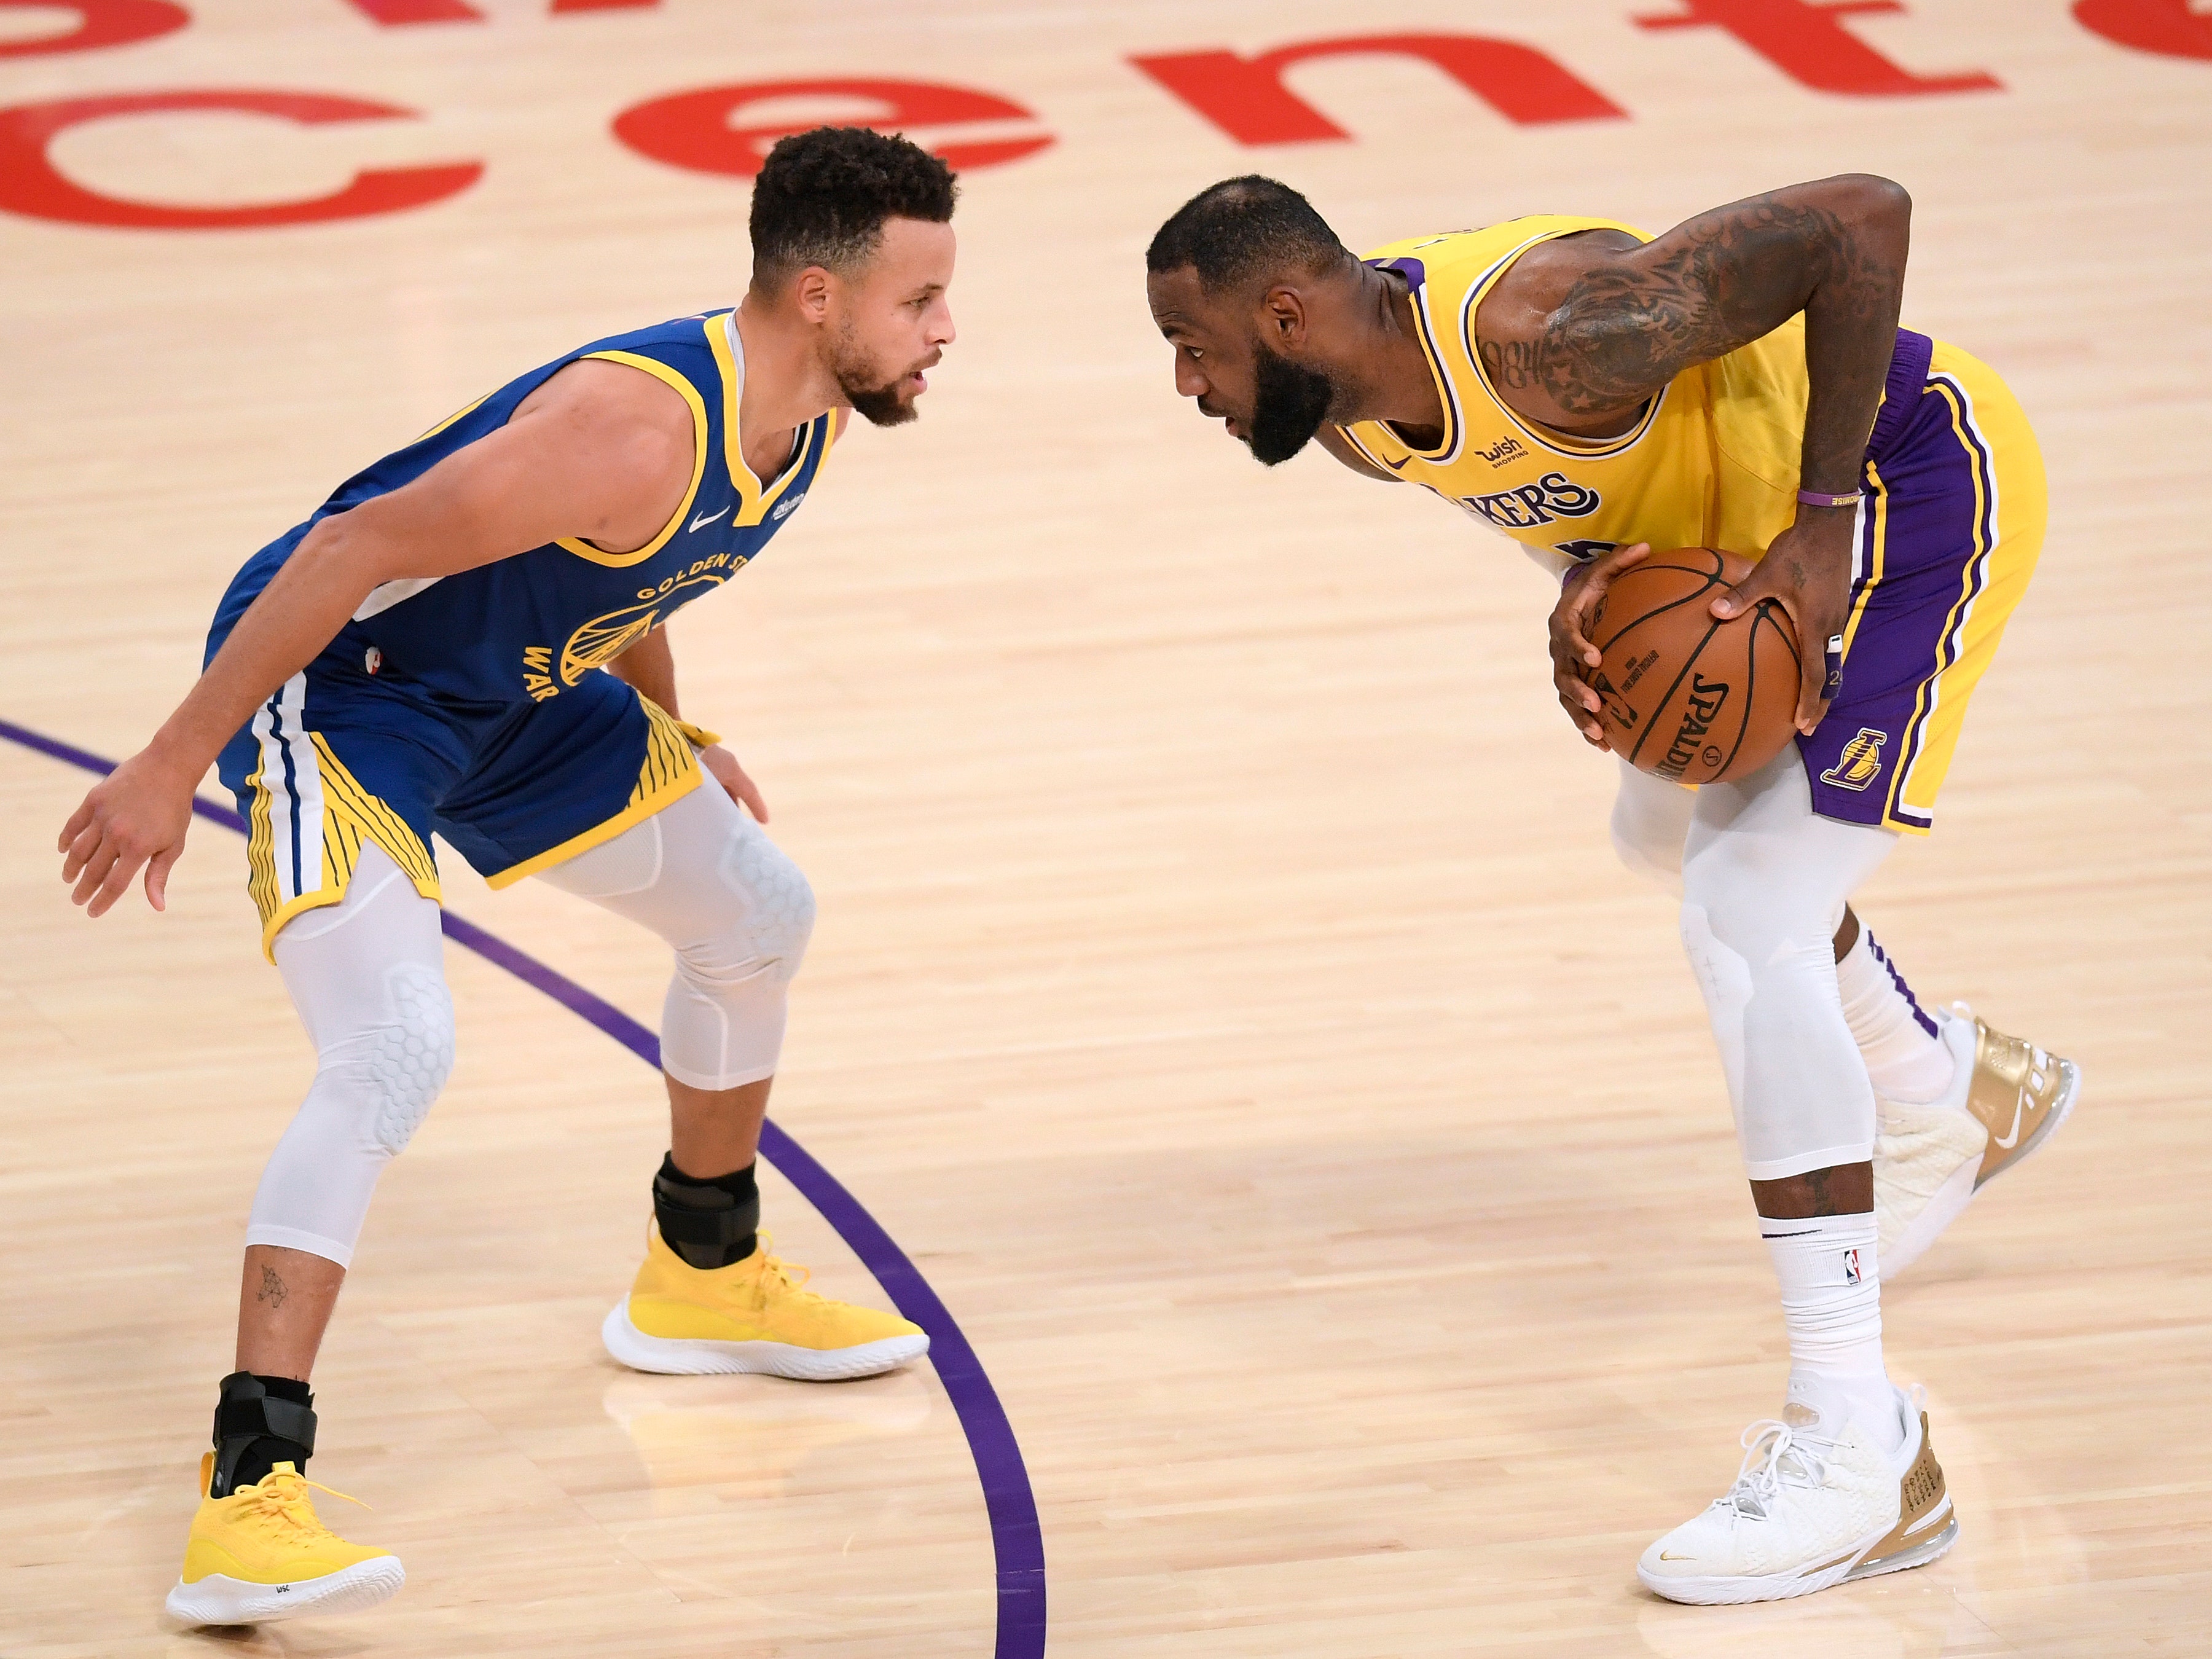 The History of LeBron James and Stephen Curry's Rivalrous Friendship